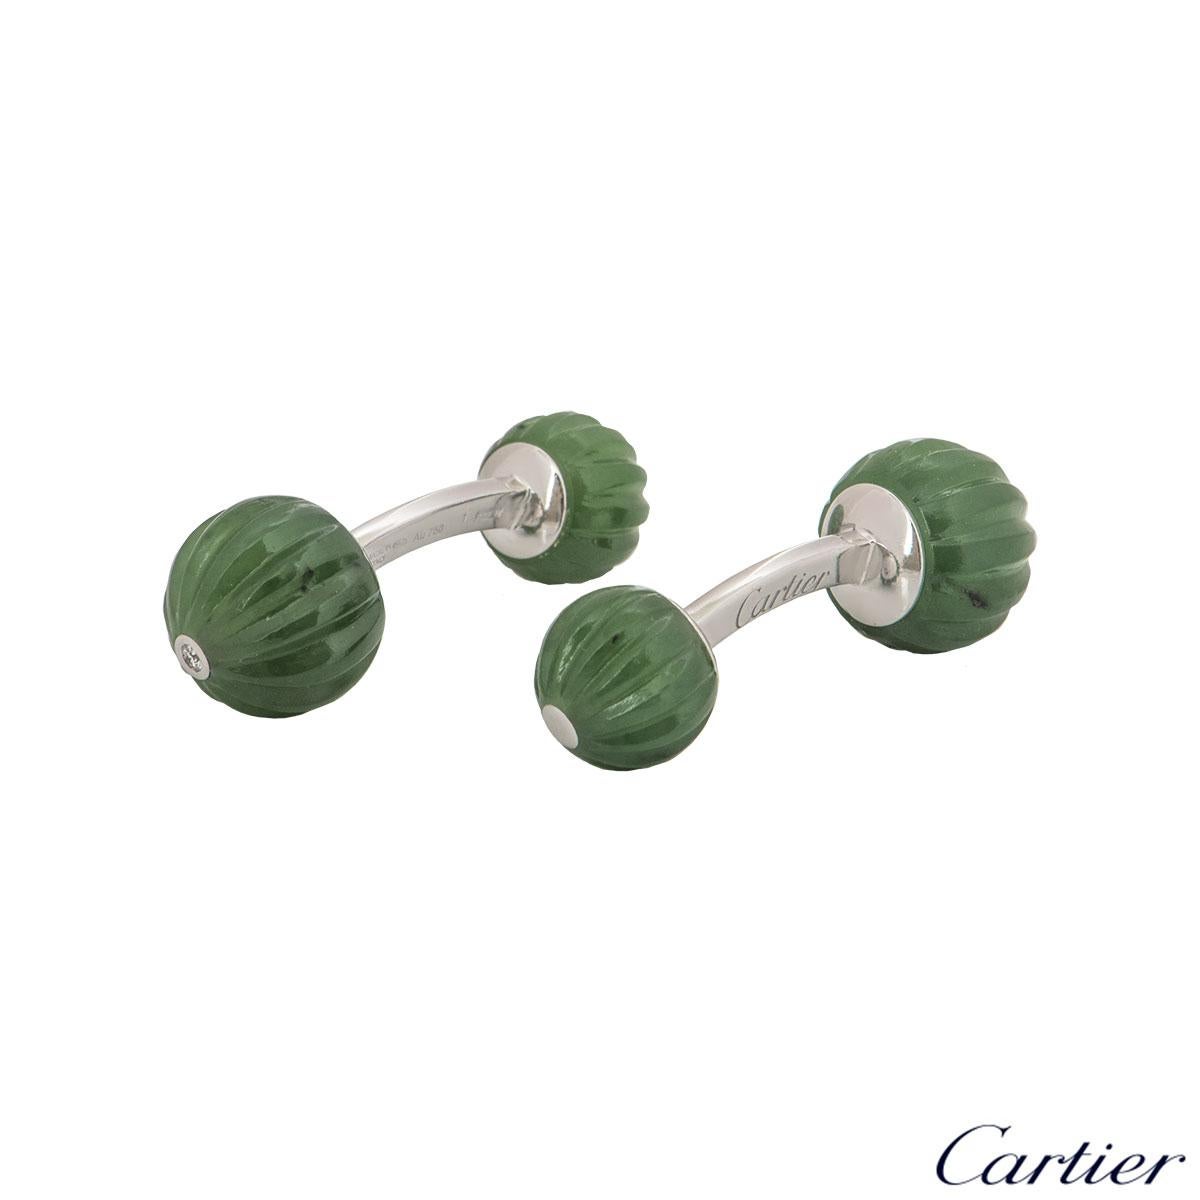 An alluring 18k white gold pair of cufflinks by Cartier. The cufflinks feature 4 jade beads in alternate sizes with a single diamond at the tip of the largest bead. The cufflinks are encased together by a bar fitting with a length of 3.00cm with a